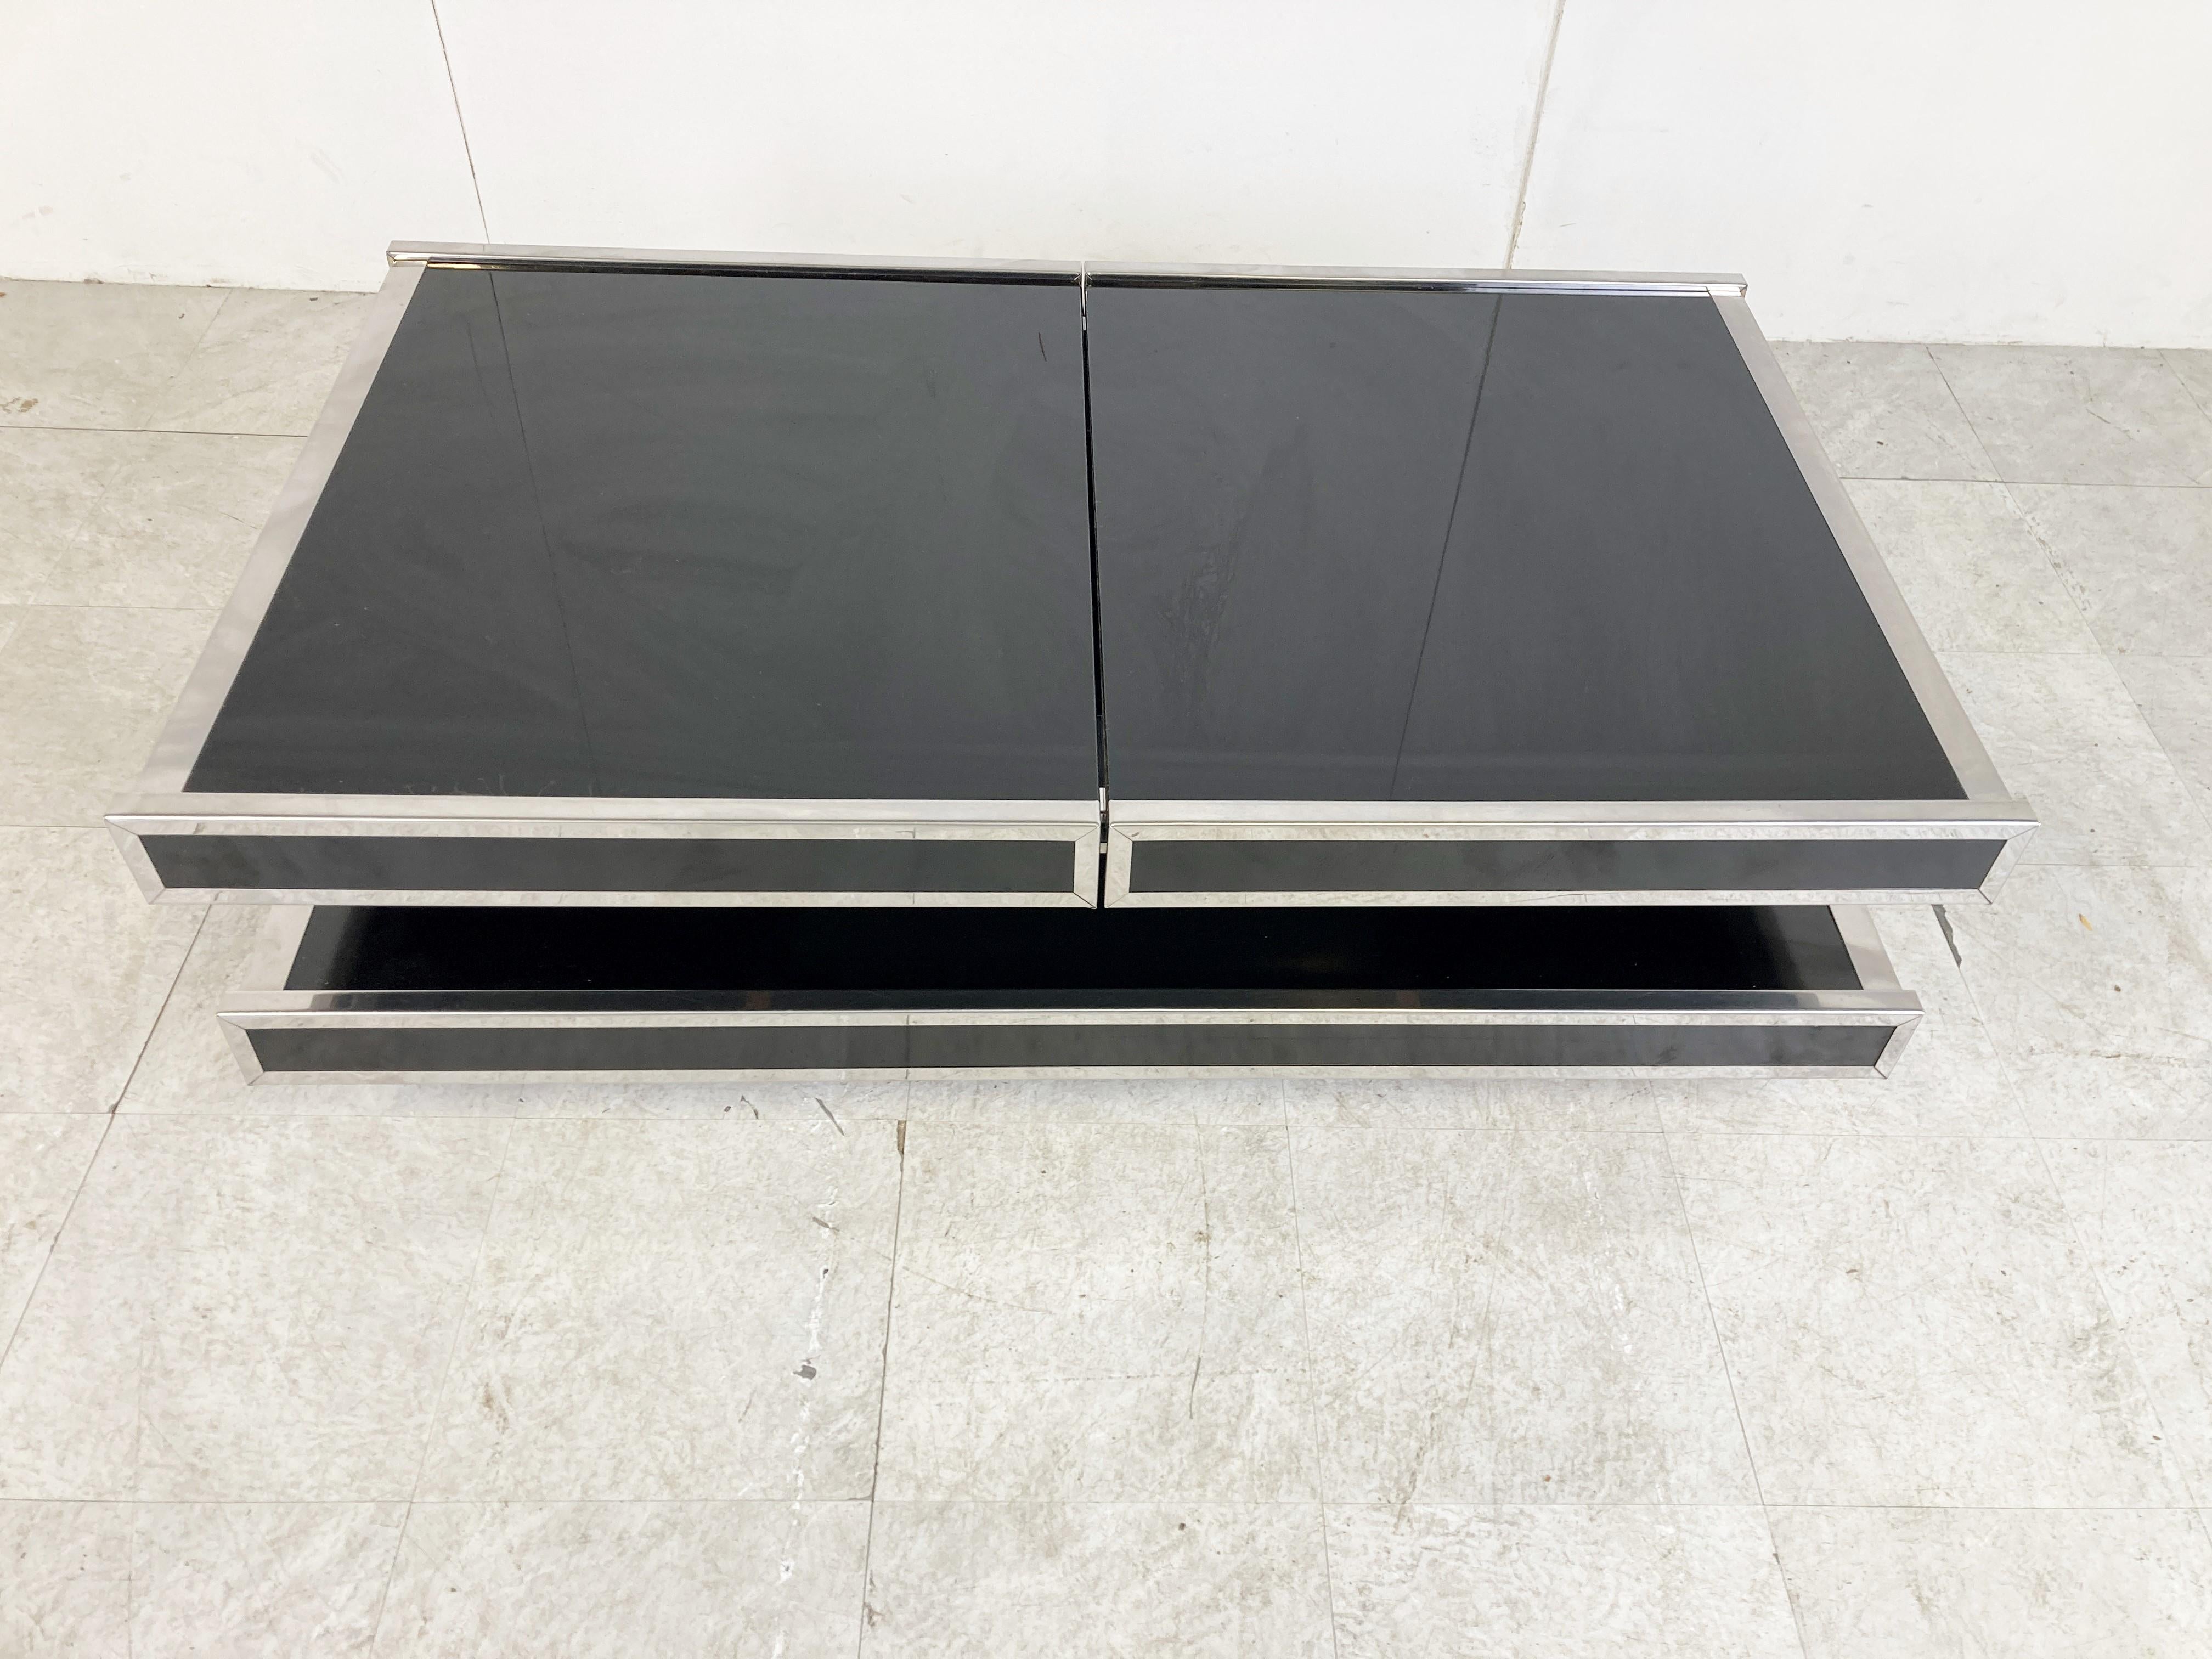 Black lacquered coffee table with sliding table tops revealing an aluminum bar compartment ideal to store bottles and glasses.

Designed by Willy rizzo for Mario Sabot.

The table is in a original vintage condition with normal age related